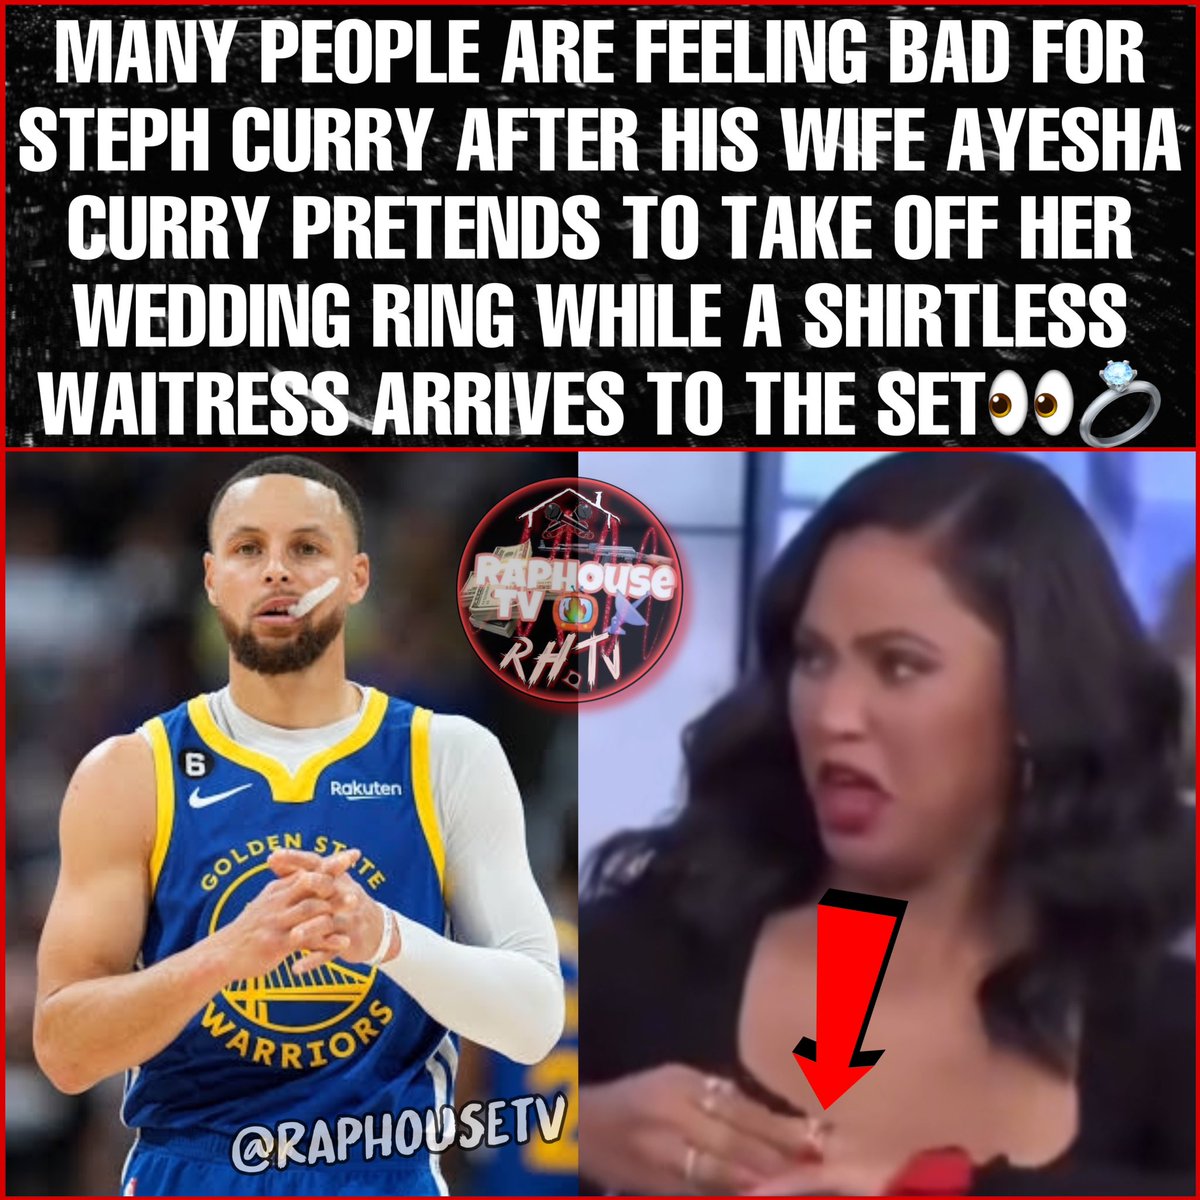 Many People Are Feeling Bad For Steph Curry After His Wife Ayesha Curry Pretends To Take Off Her Wedding Ring While A Shirtless Waitress Arrives To The Set 👀💍💔